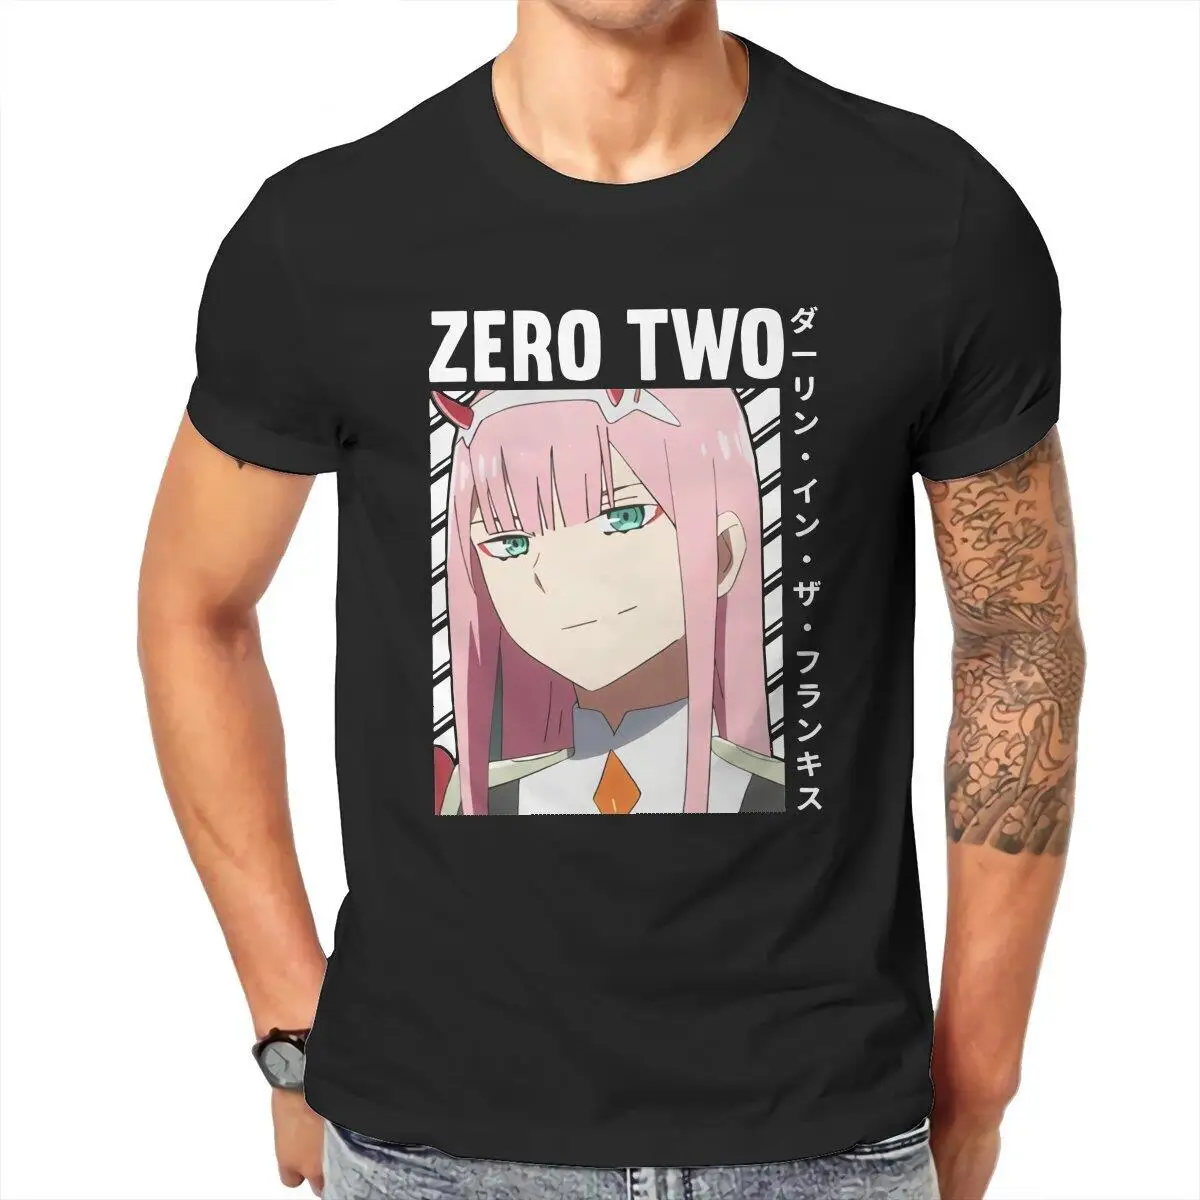 Darling In The Franxx Sweet Girl  T-Shirt Men Japanese Anime Zero Two Leisure Cotton Tee Shirt T Shirts Gift Idea Clothes